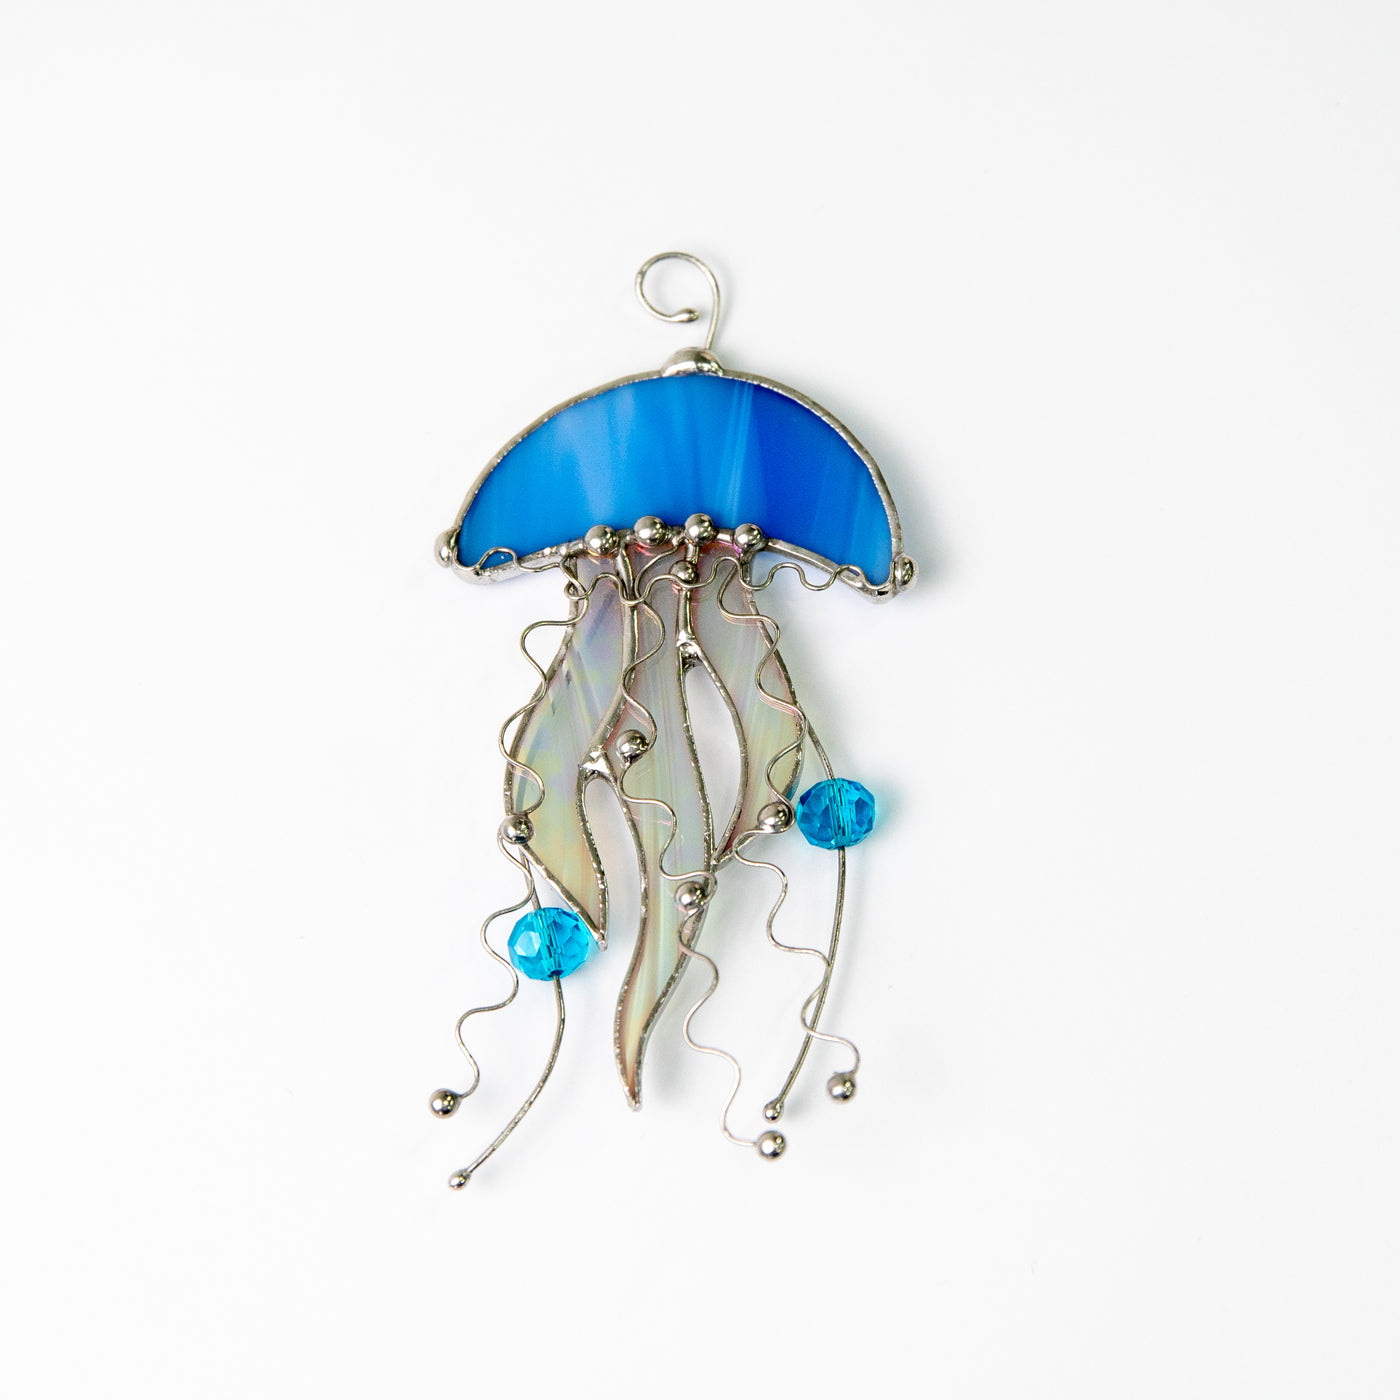 Suncatcher of a stained glass blue jellyfish with iridescent tentacles